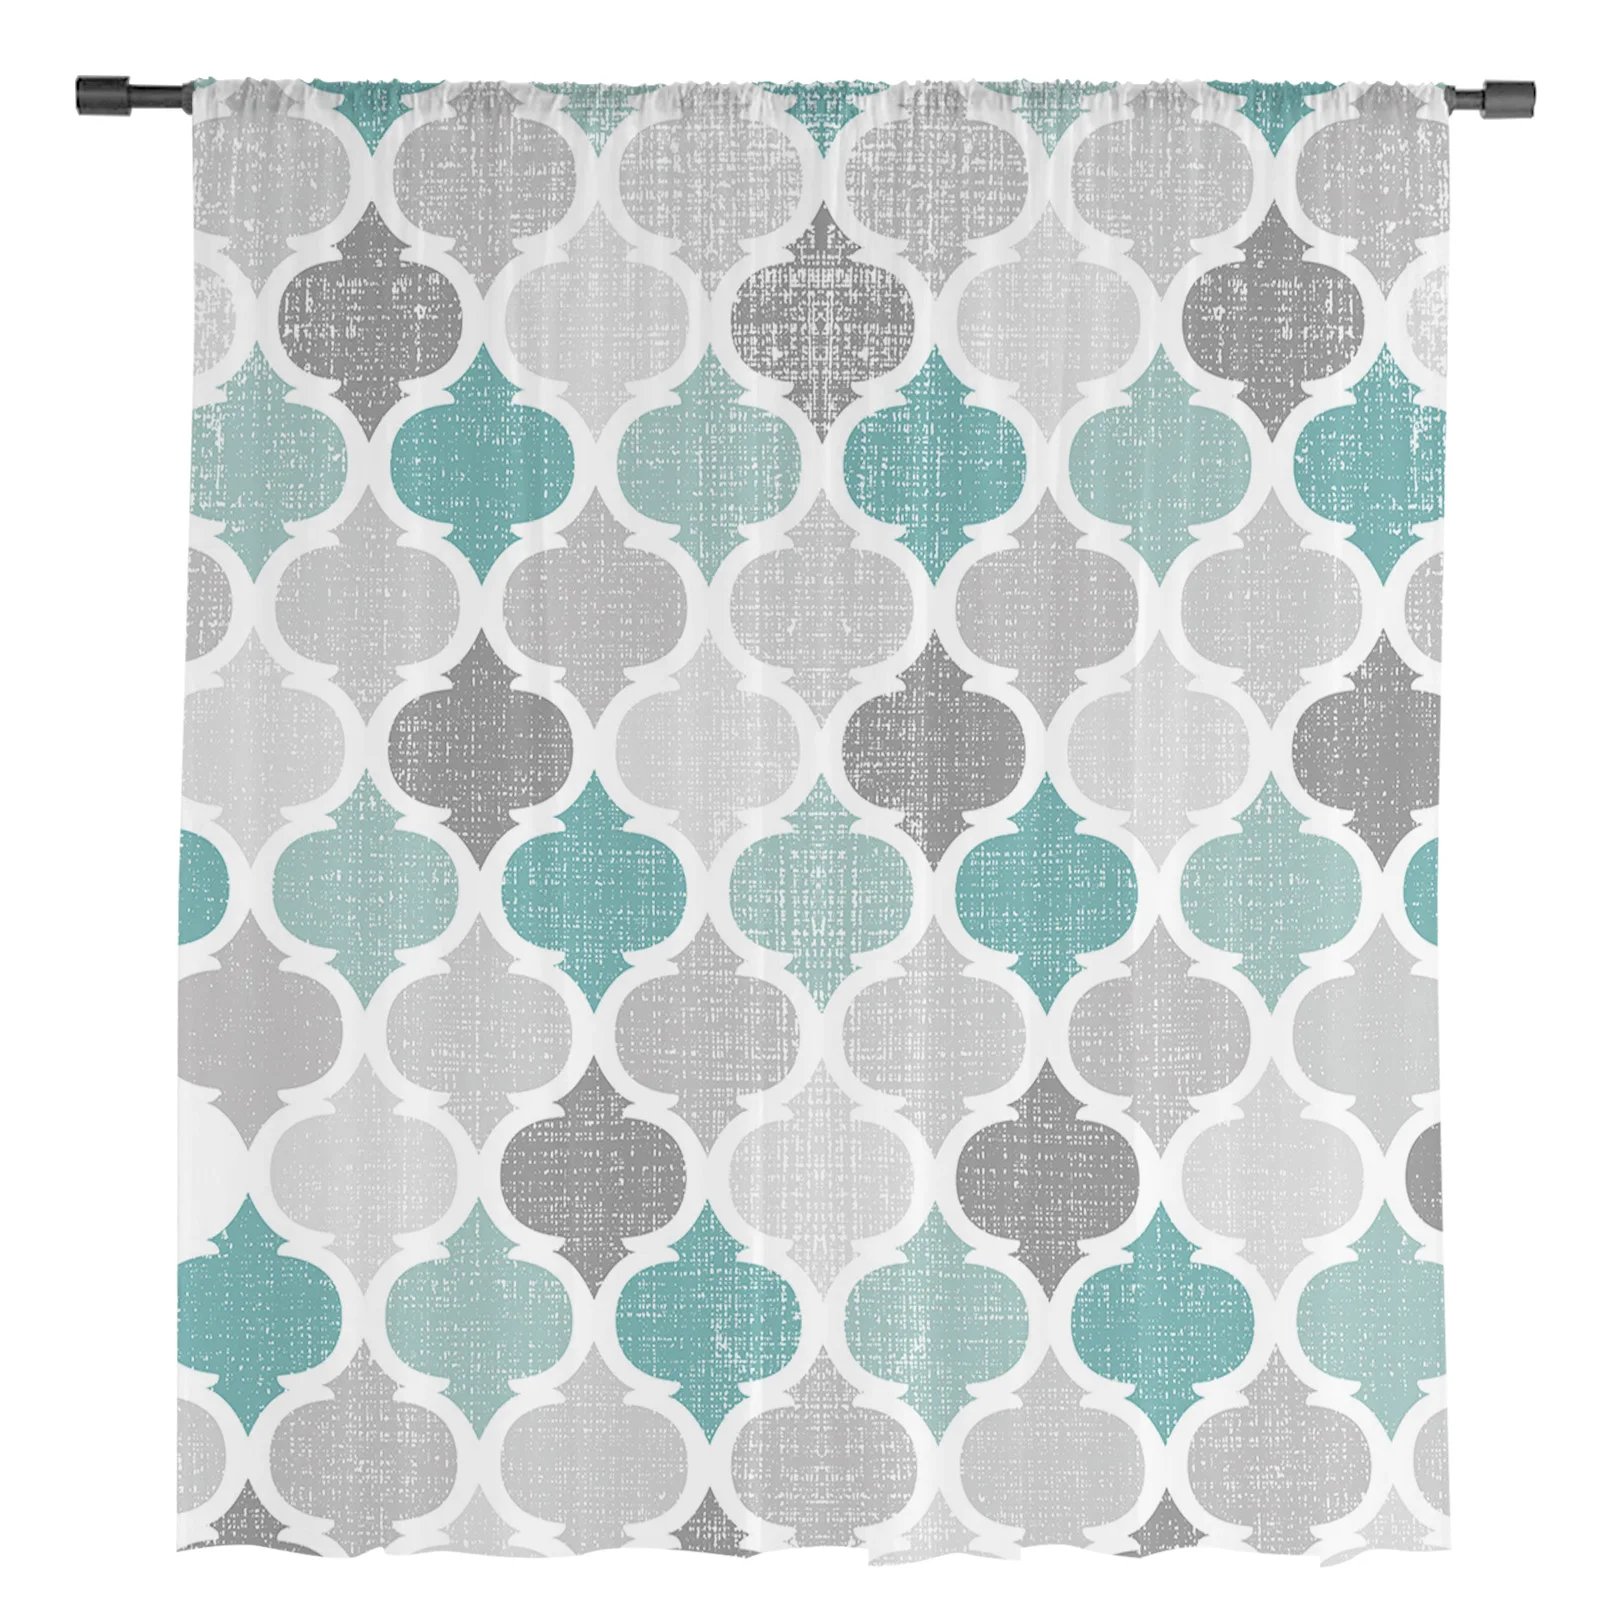 Turquoise Grey Geometric Moroccan Retro Tulle Curtains Living Room Kitchen Window Decoration Chiffon Voile Sheer Curtain